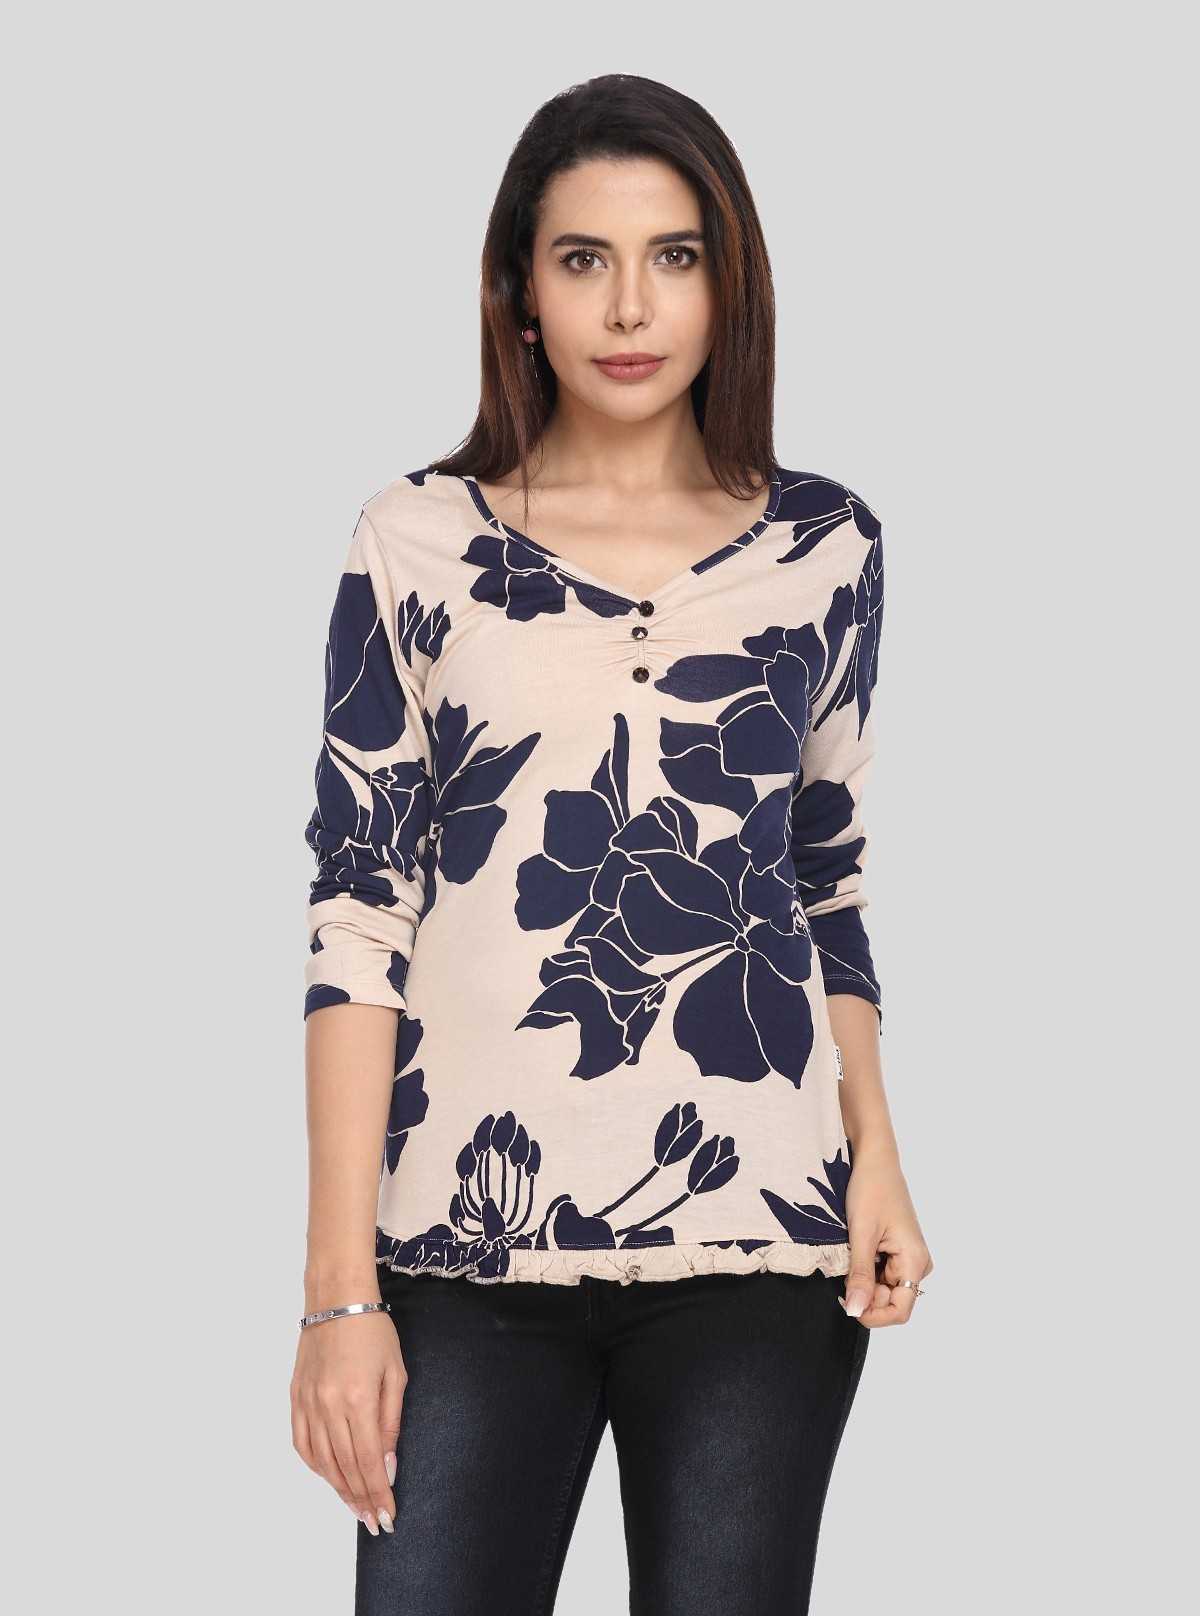 Floral Print womens top